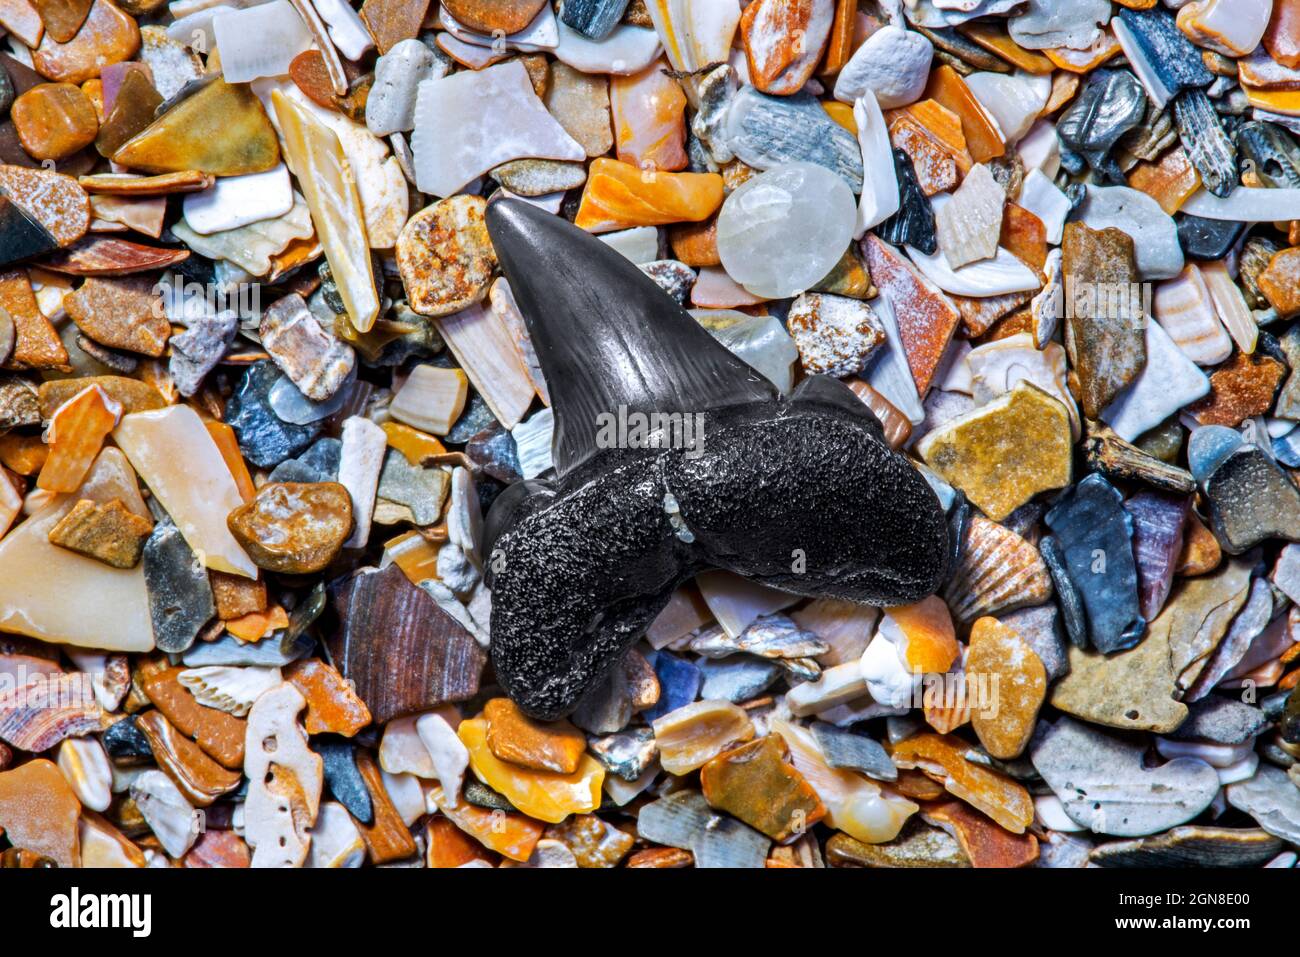 Eocene shark's tooth fossil on tideline / strandline of beach at low tide along the North Sea coast at the Zwin, Knokke-Heist, West Flanders, Belgium Stock Photo